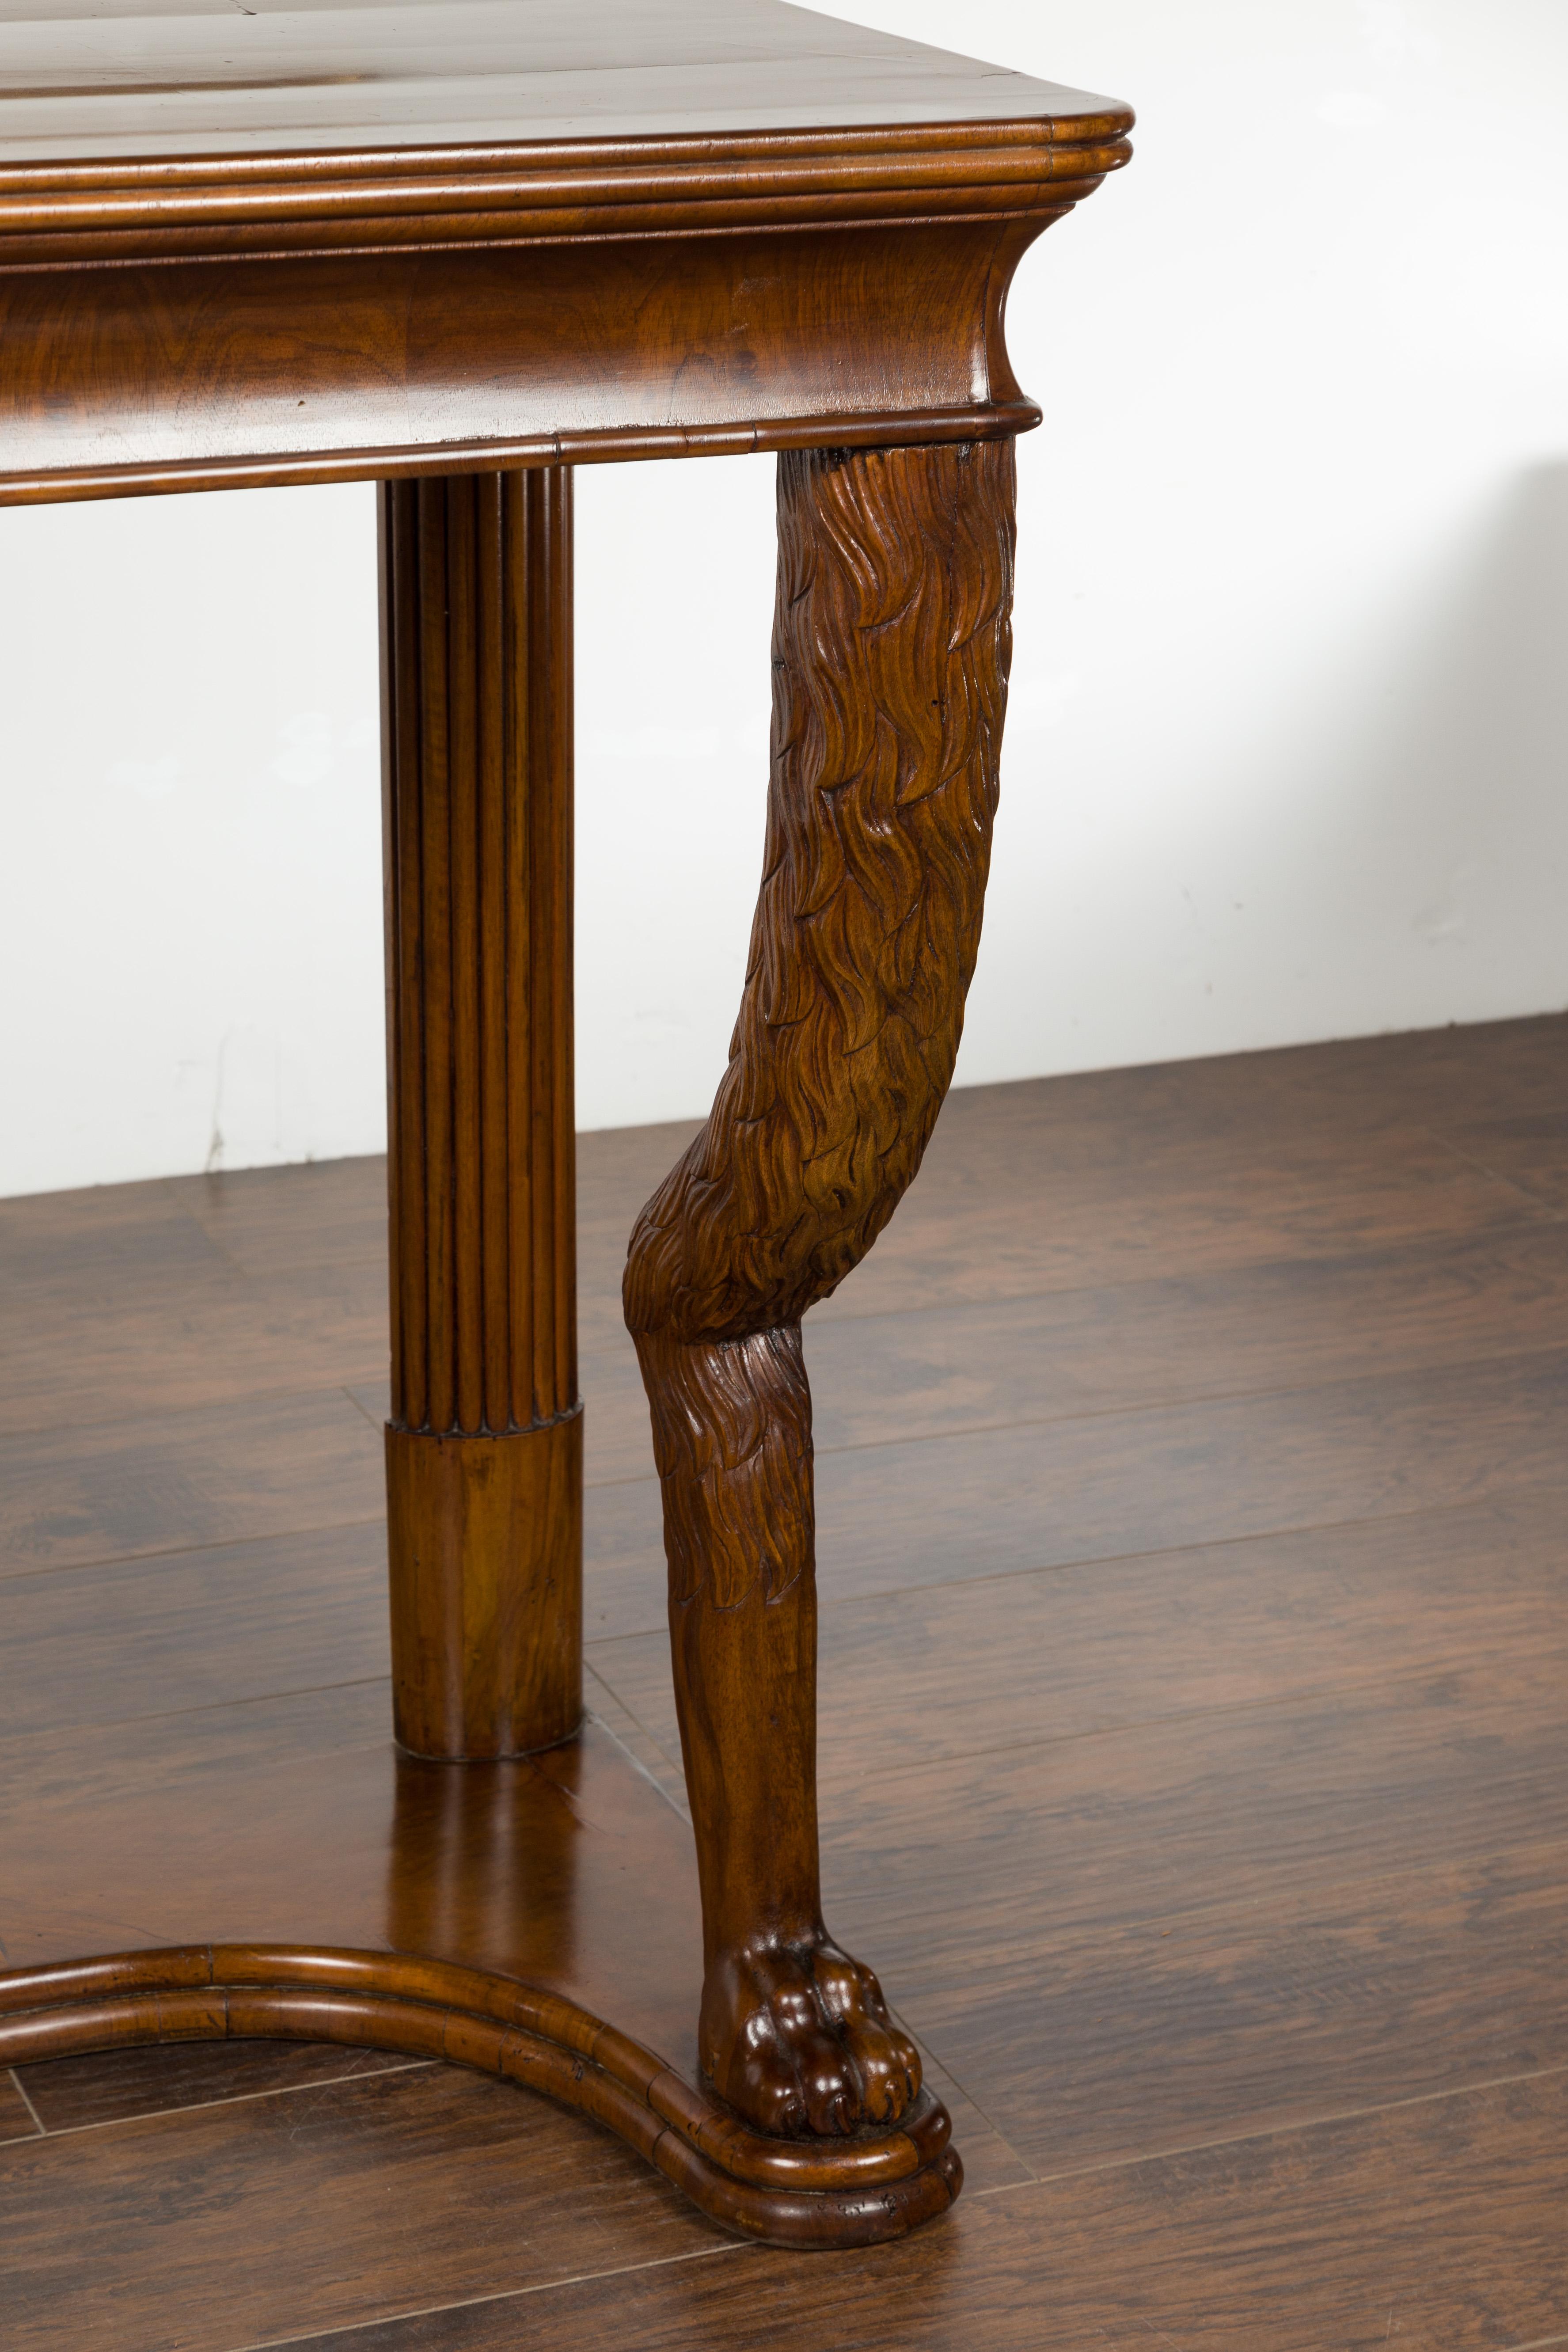 Biedermeier Period 1840s Walnut Console Table with Fur Style Legs and Paw Feet 3